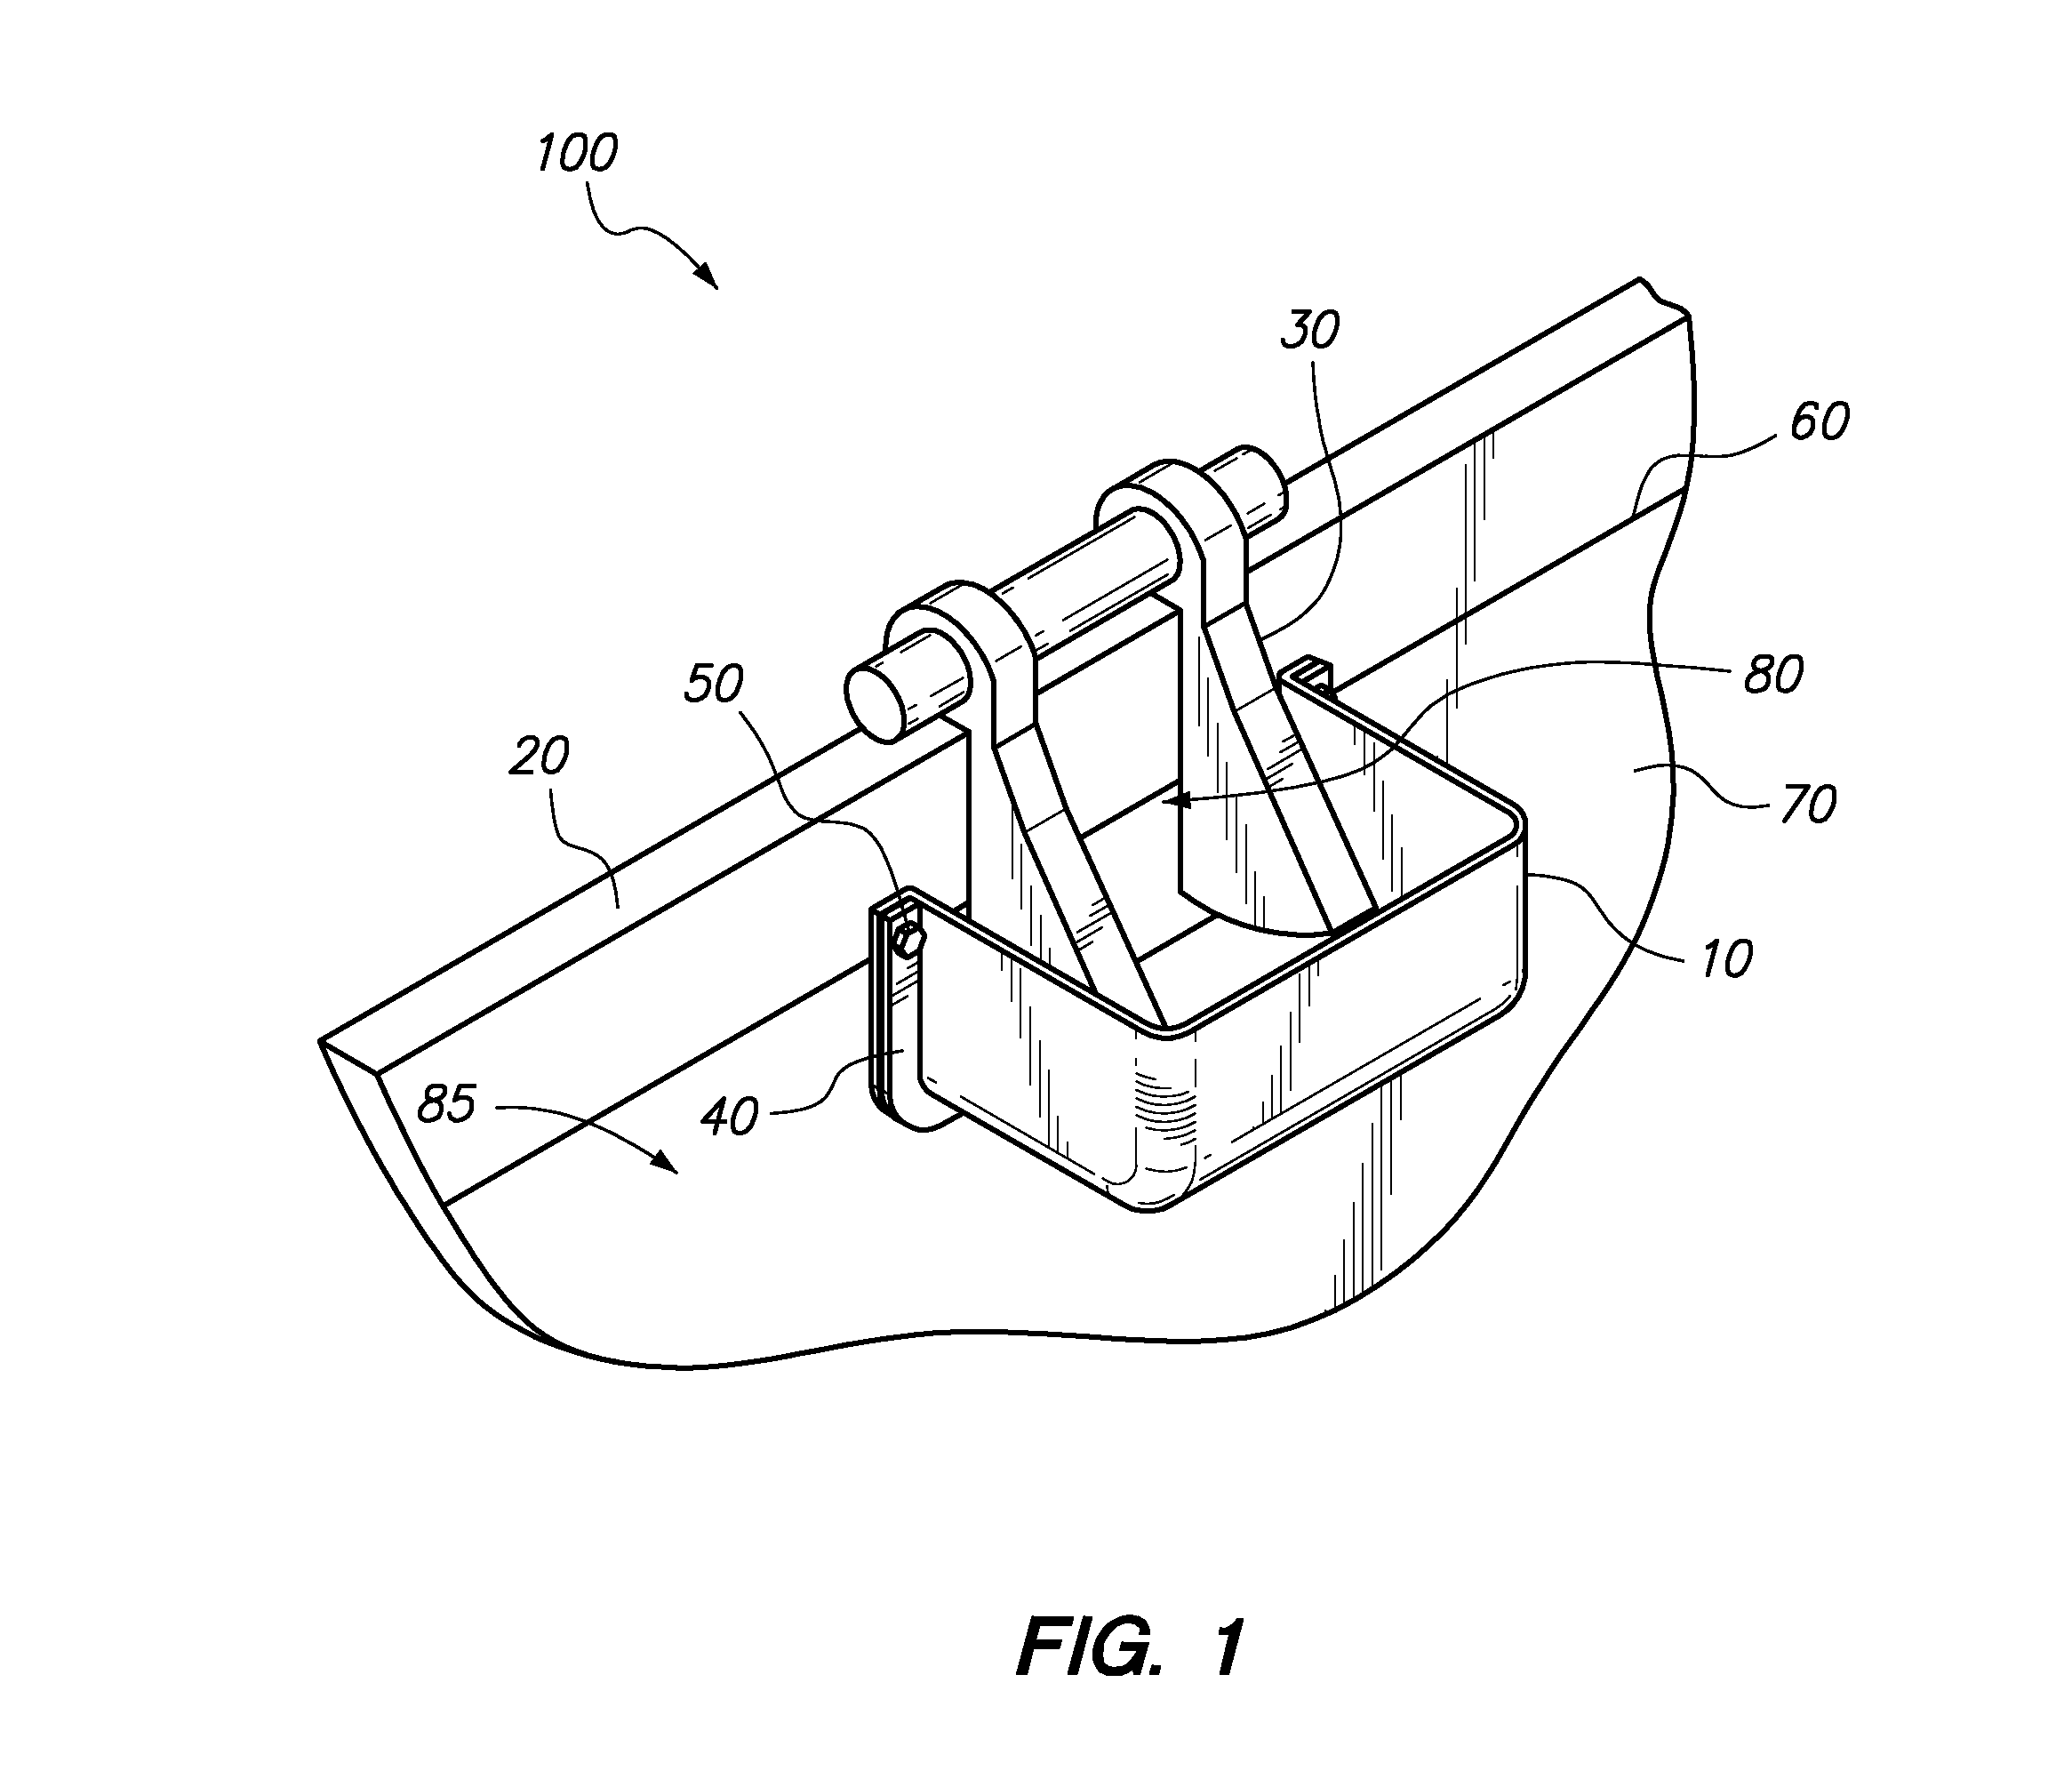 Barrier System for Inhibiting Marine Growth on Submerged Component of Boat